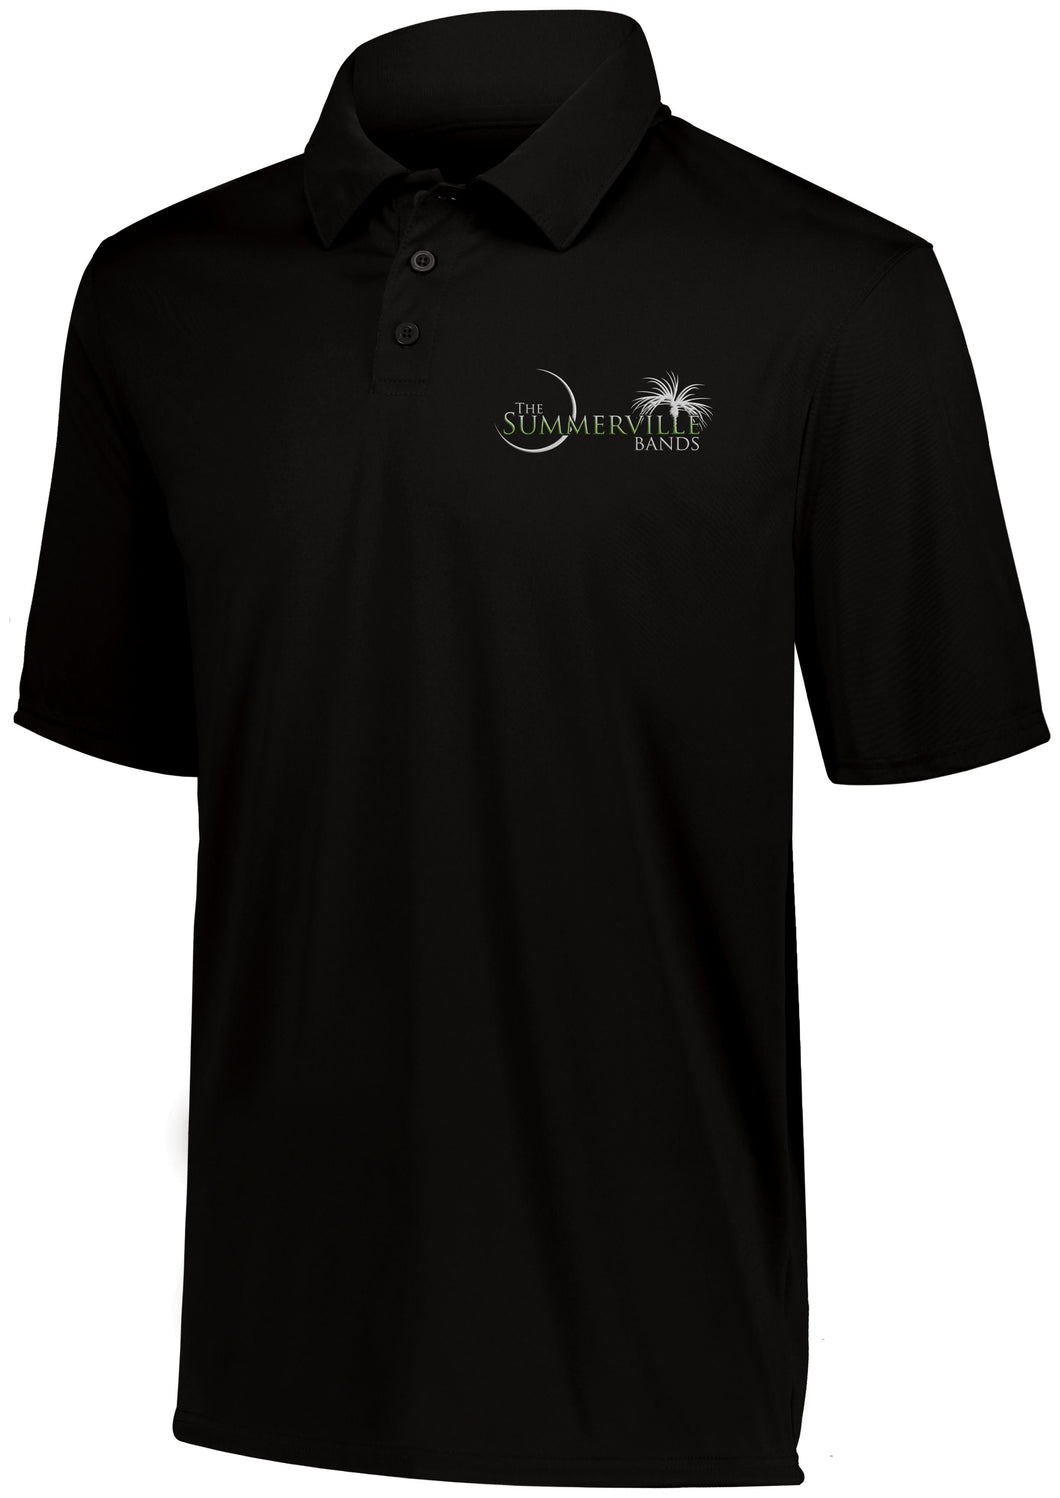 Summerville Bands Embroidered Mens Vital Embroidered Polo